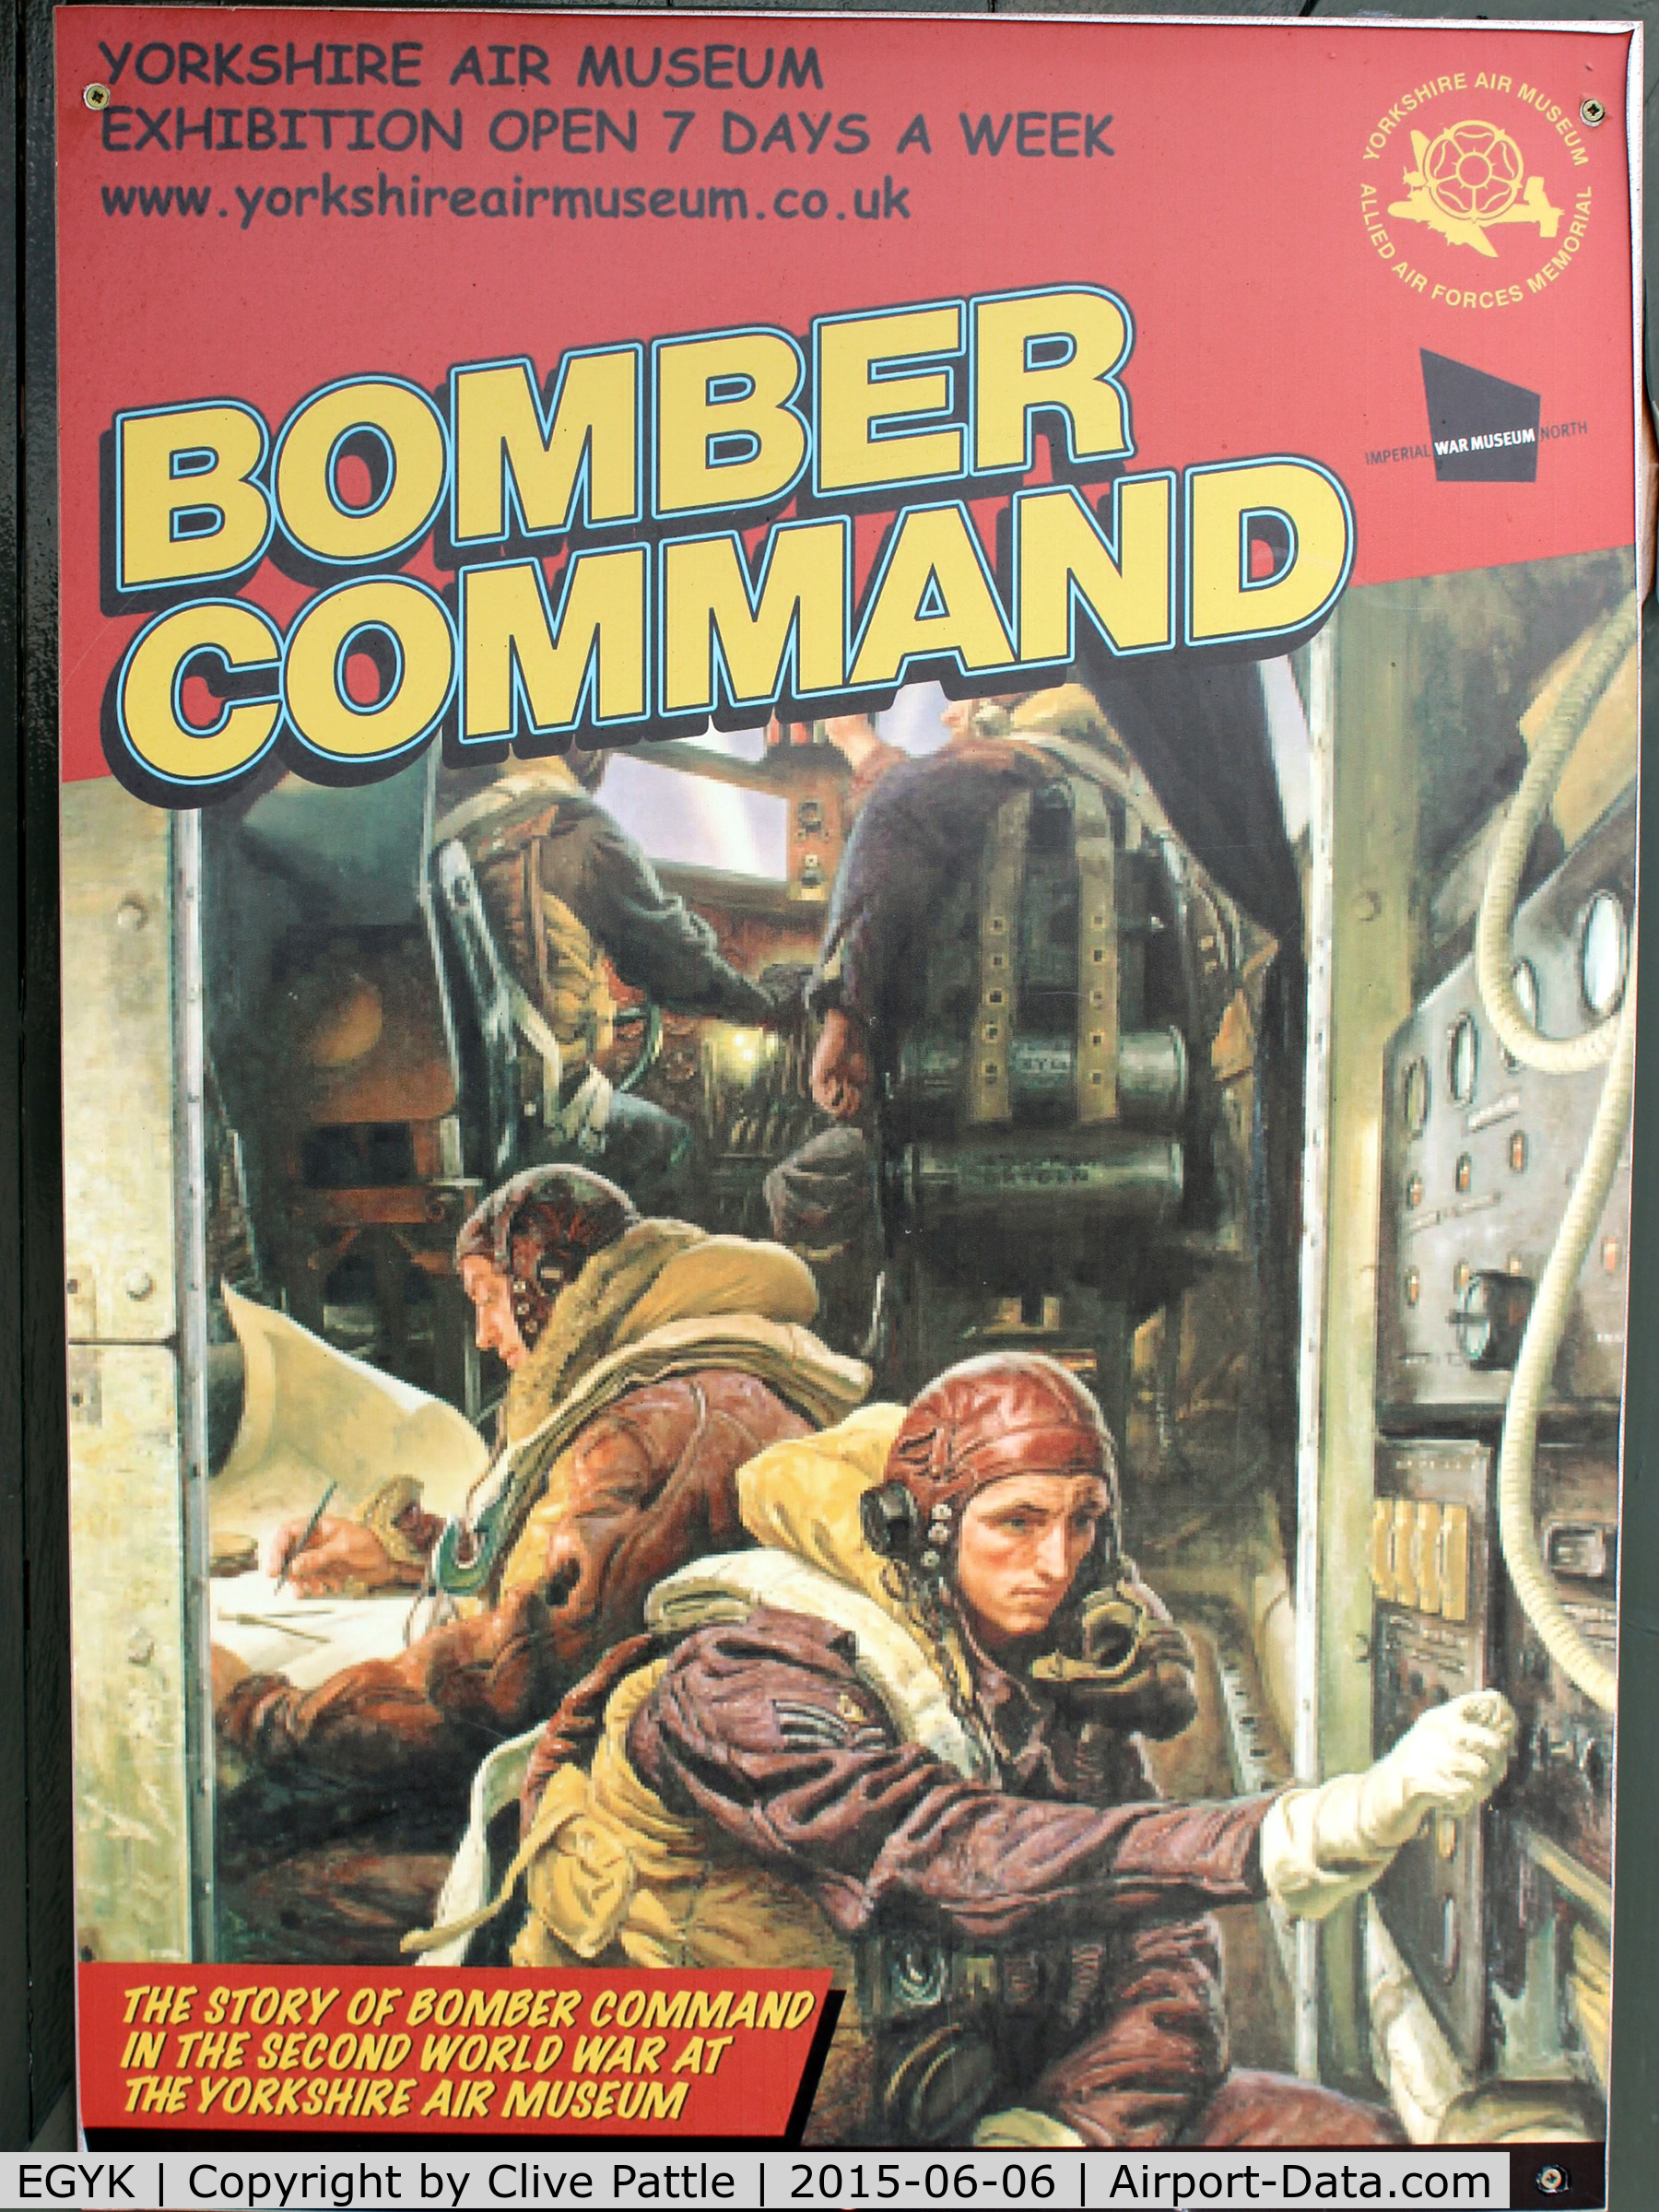 EGYK Airport - A Bomber Command display poster at the Yorkshire Aviation Museum, Elvington.